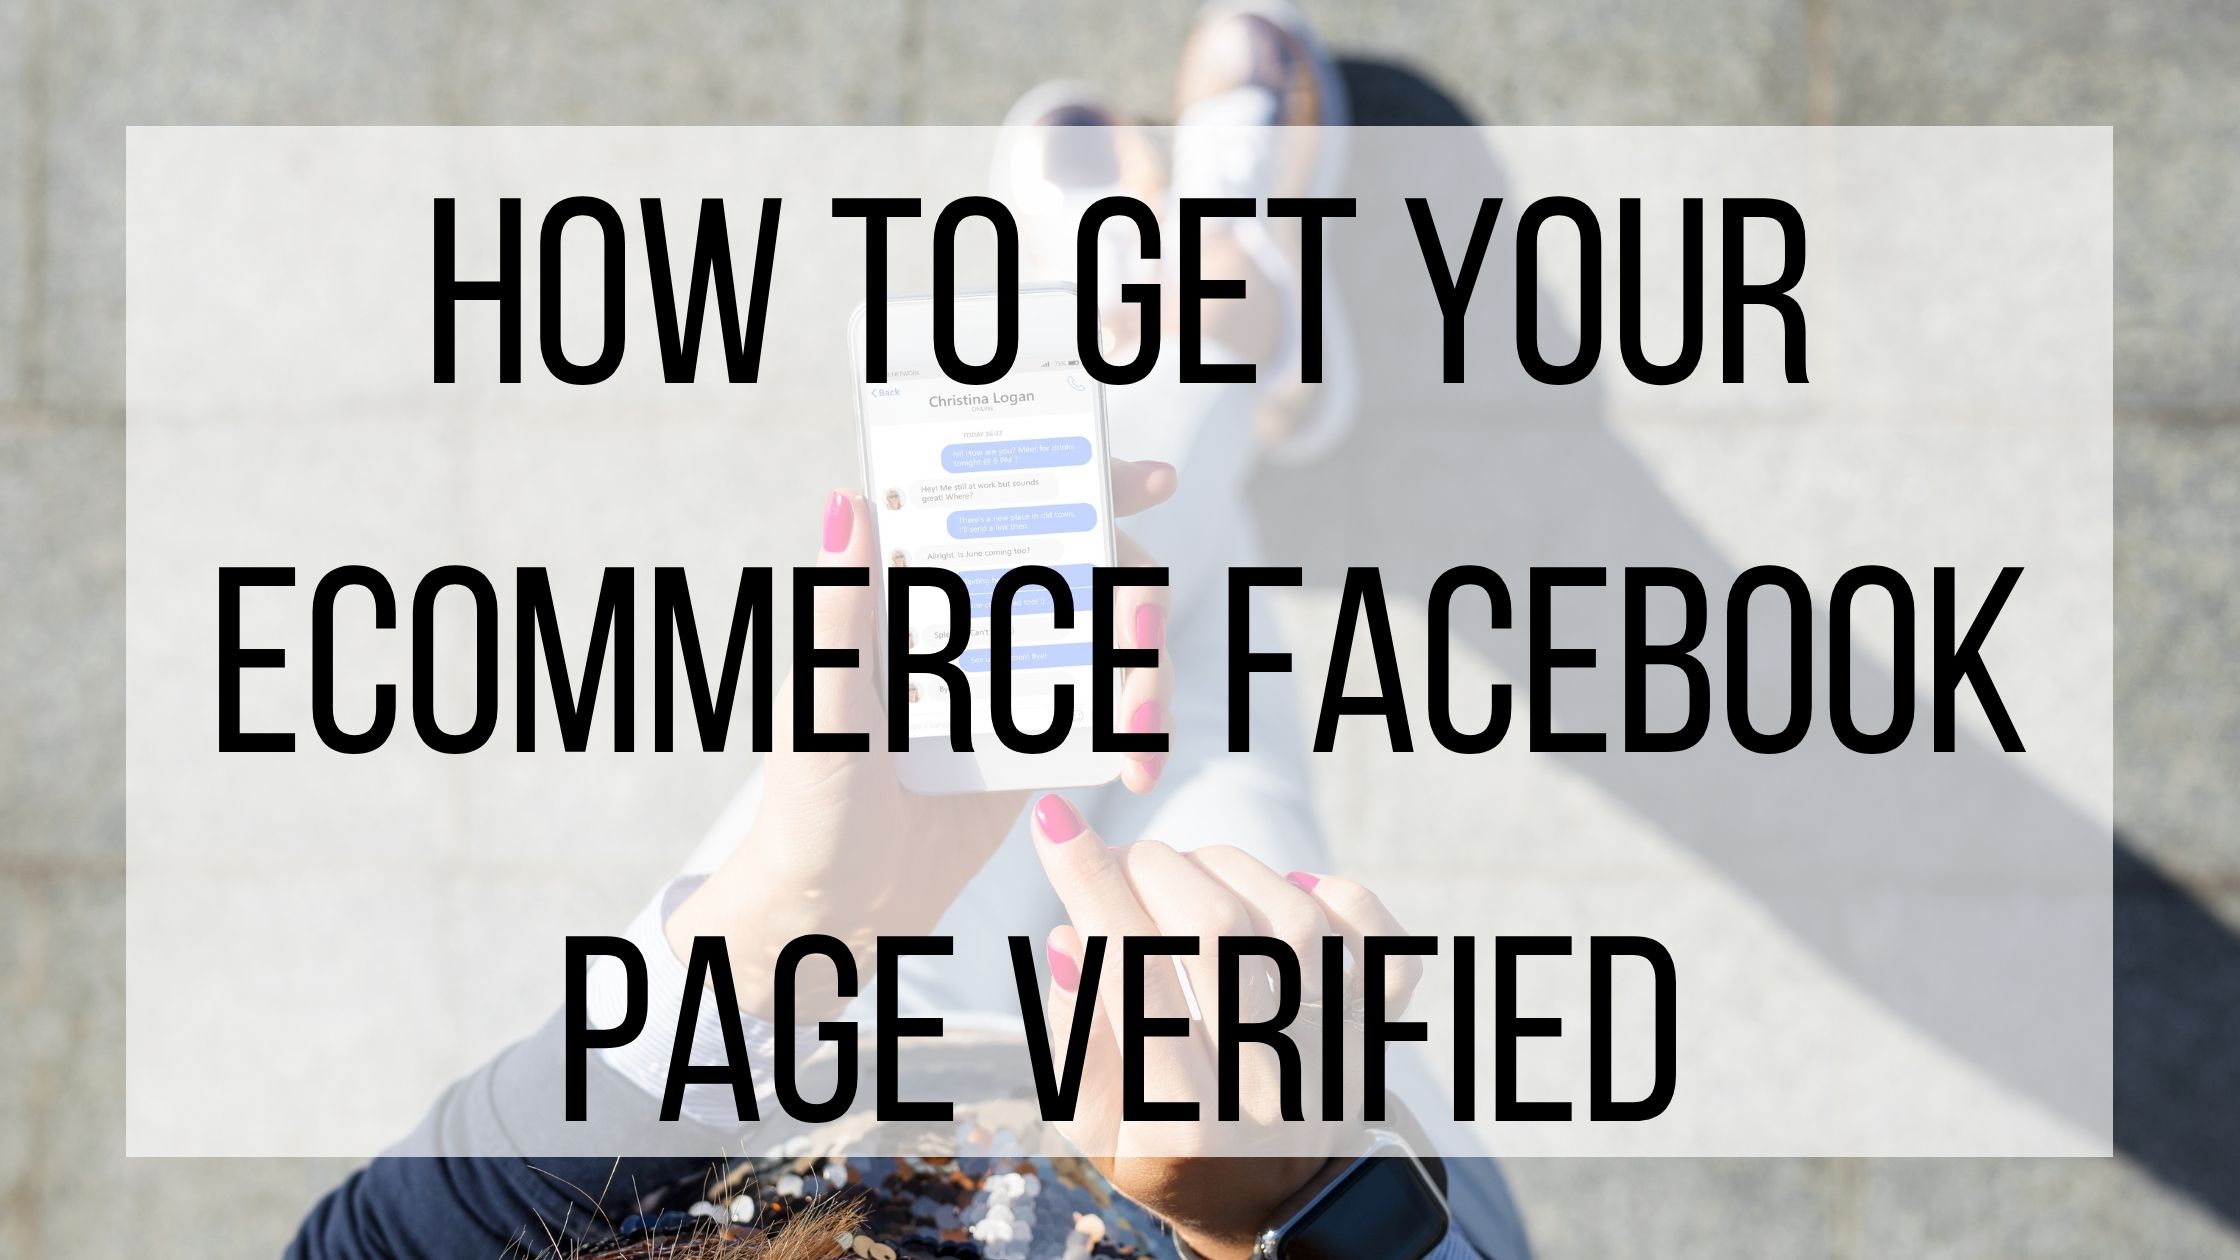 How to Get Your Facebook Page or Account Verified